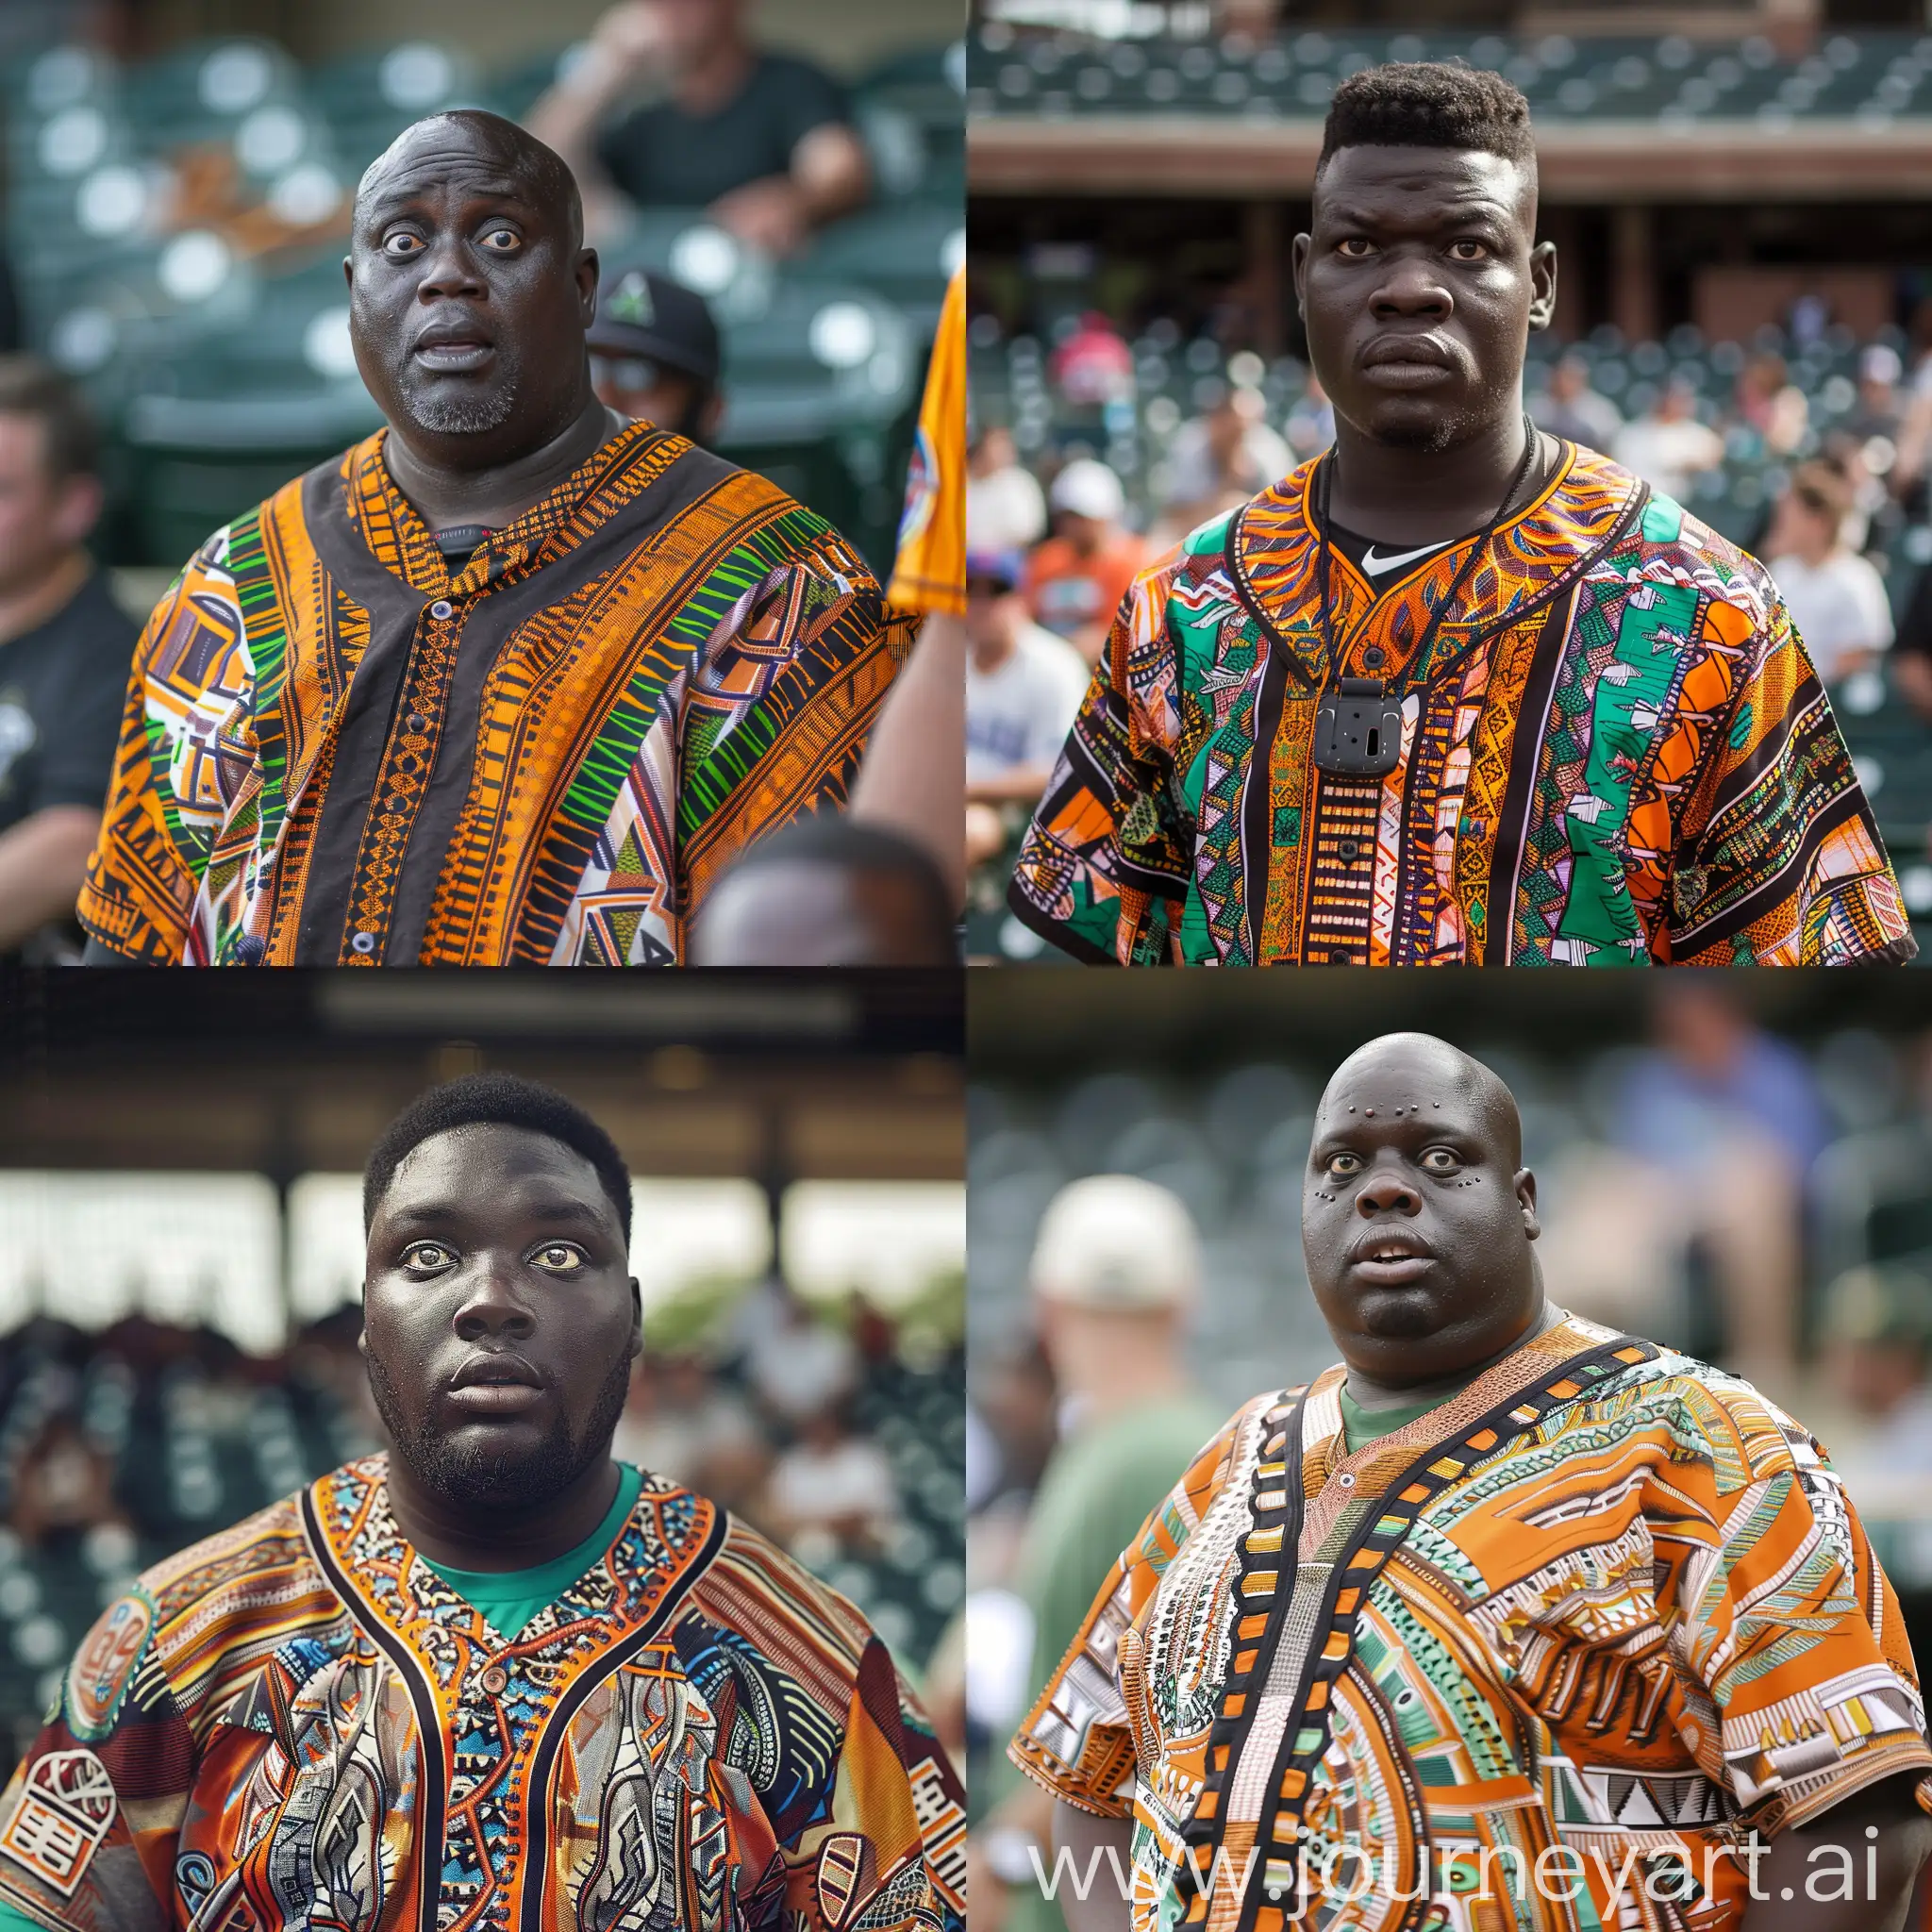 black history teacher at baseball game with really small eyes and large build. wearing an african traditional shirt